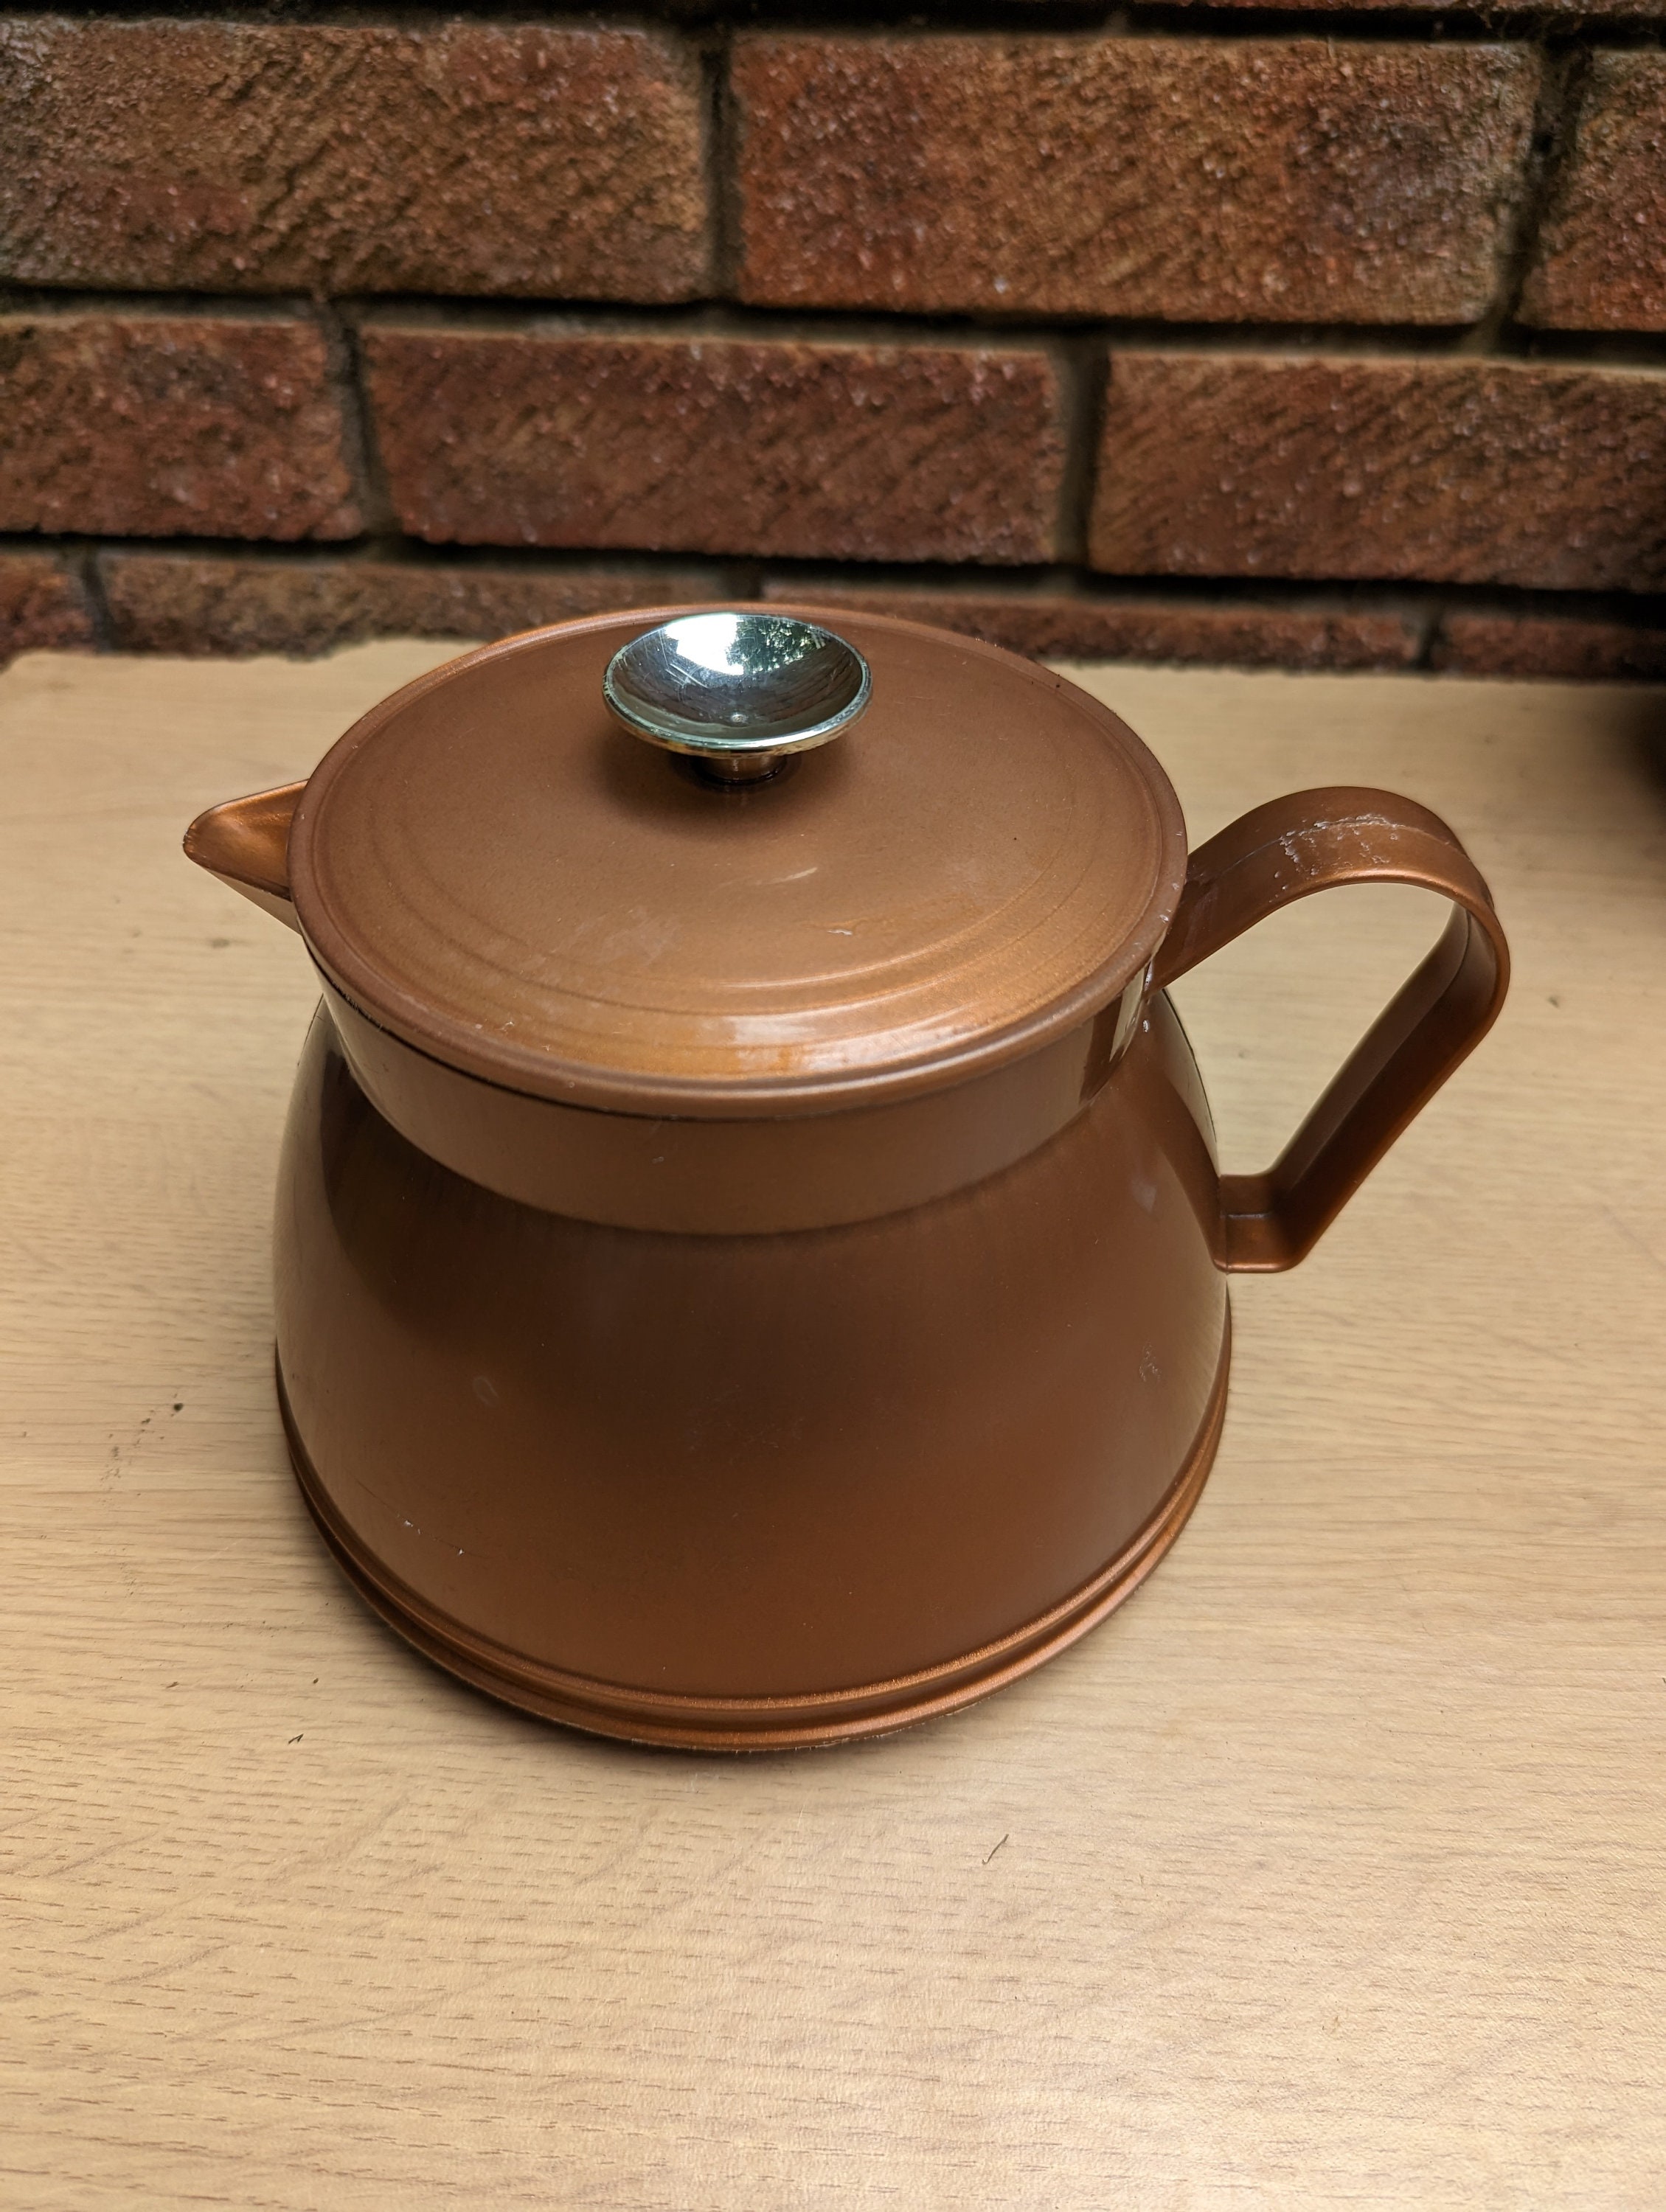 Welware Plastic Thermal Teapot Aged Copper Colour Design,  UK